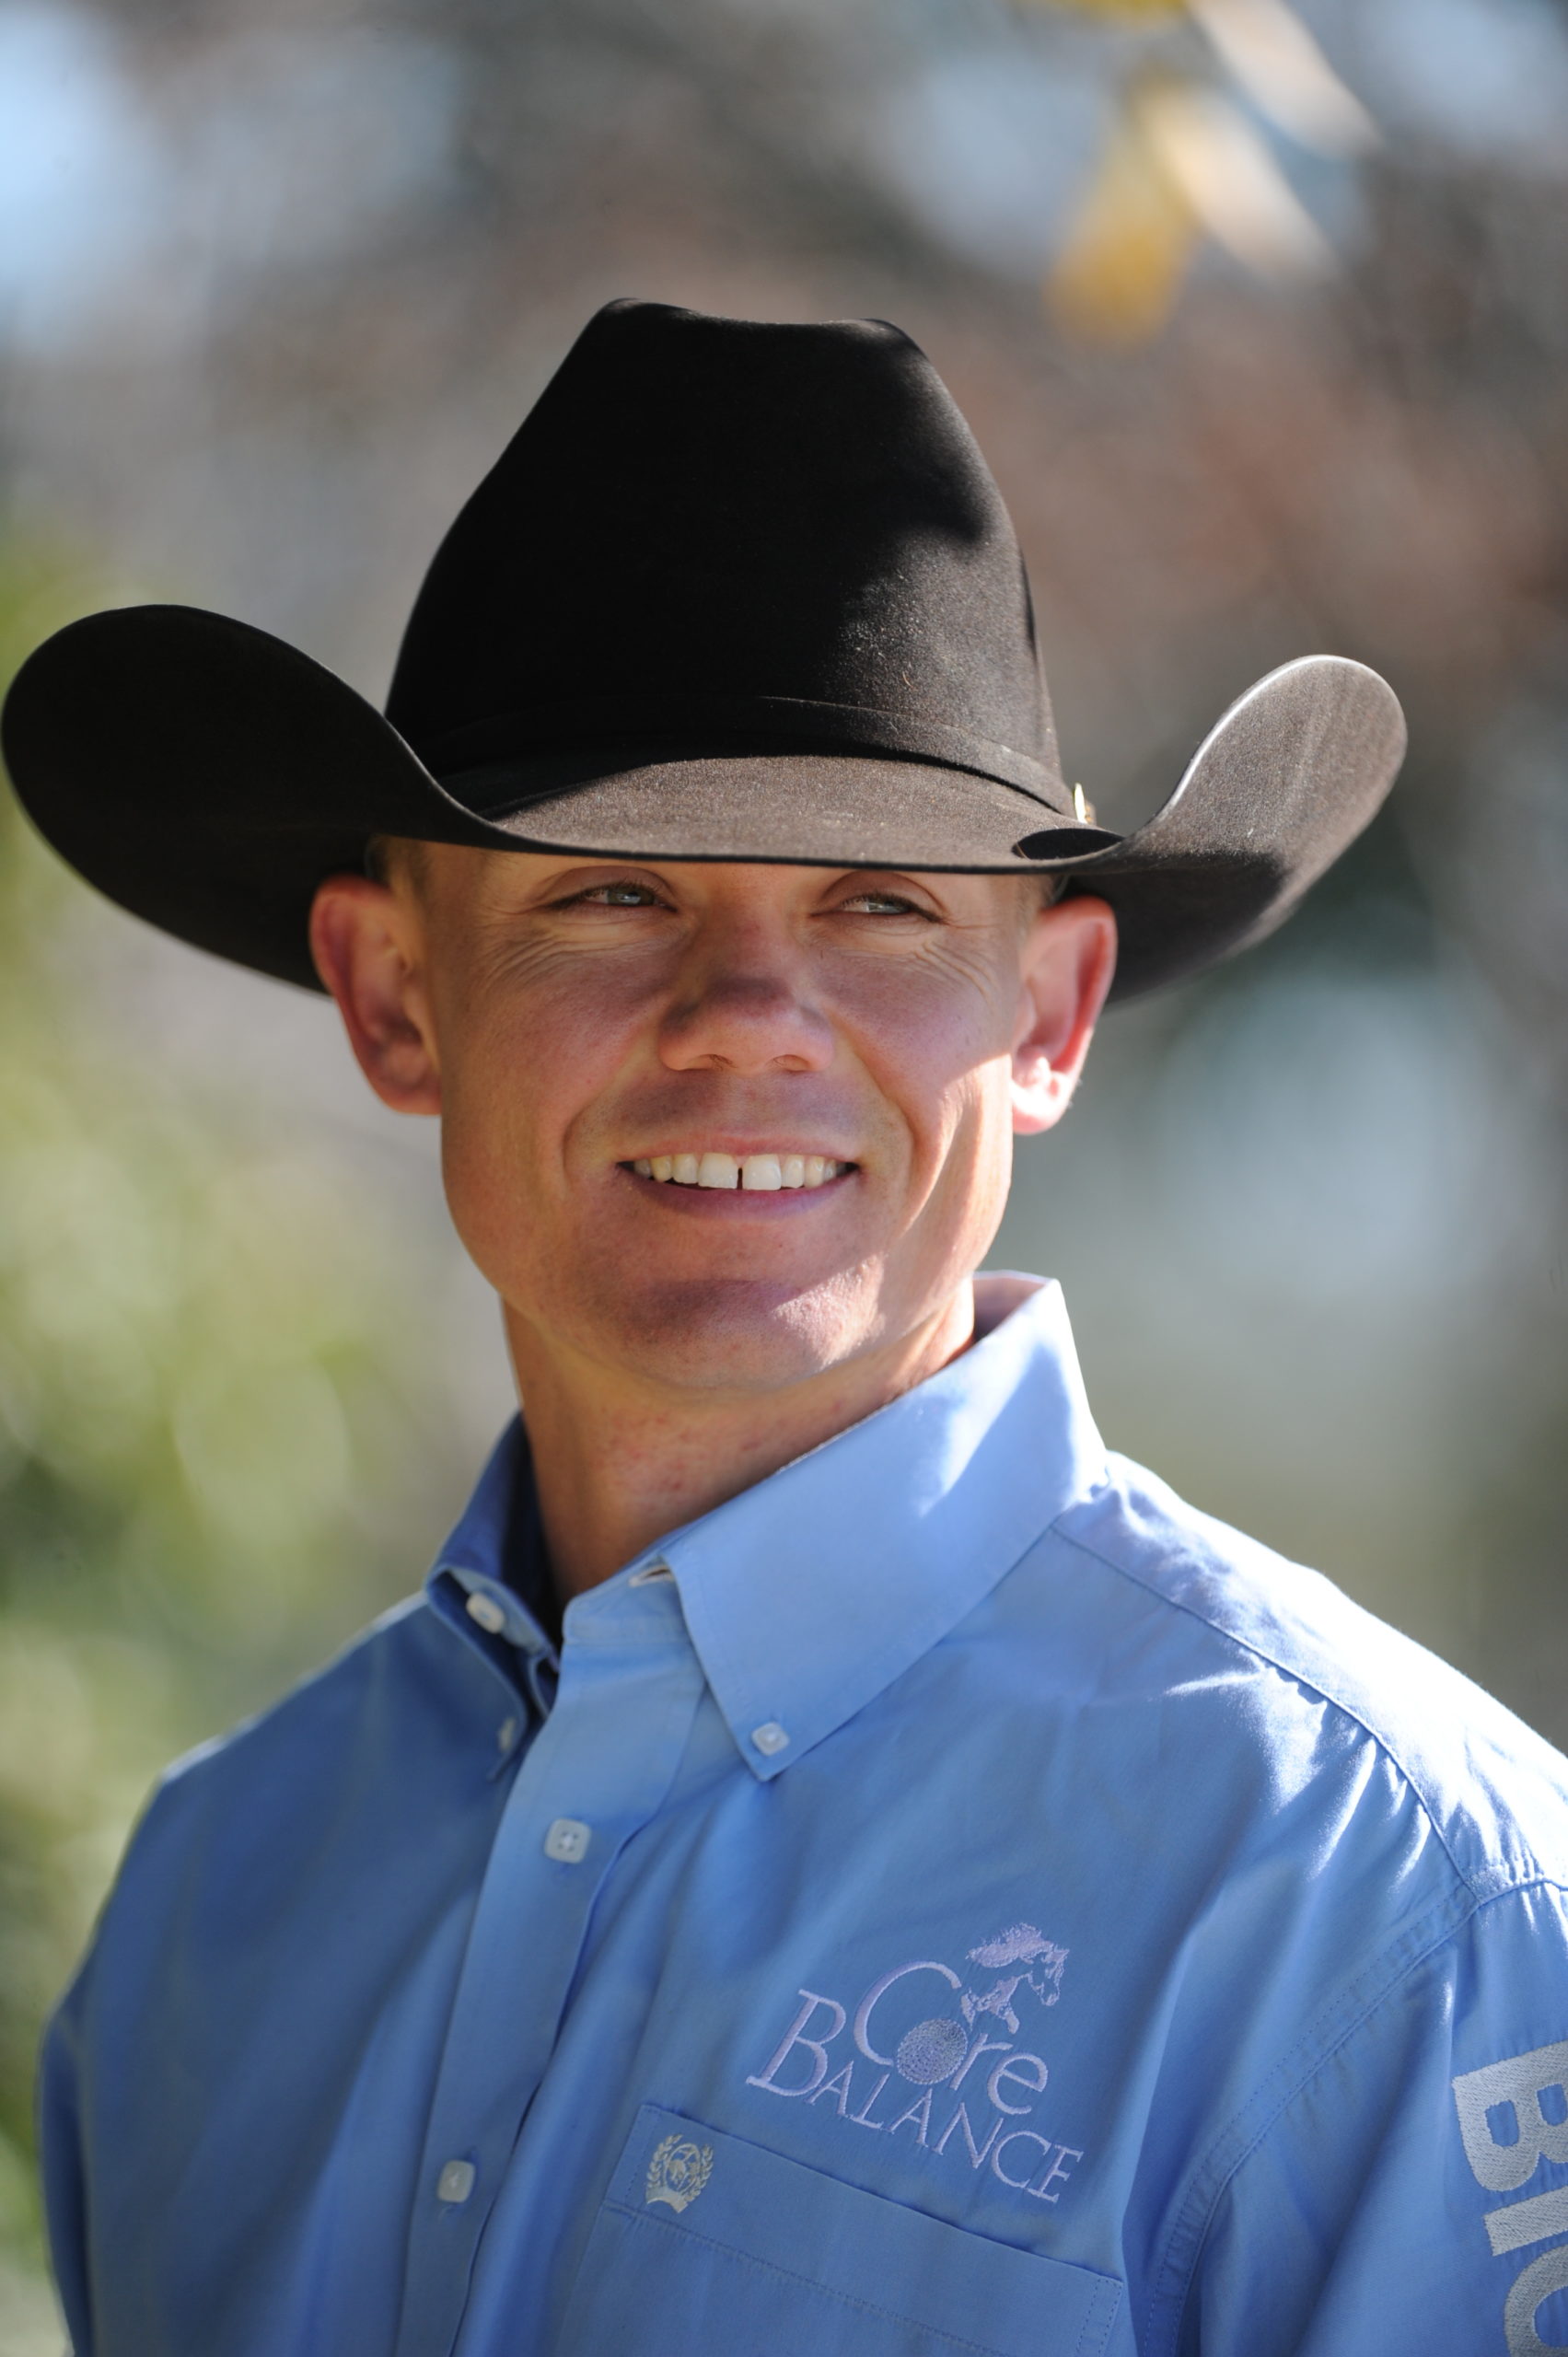 The Long Lasting Impressions of Buster Welch - Cutting Horse Training  Videos, Clinics, Coaching - CHTOLive